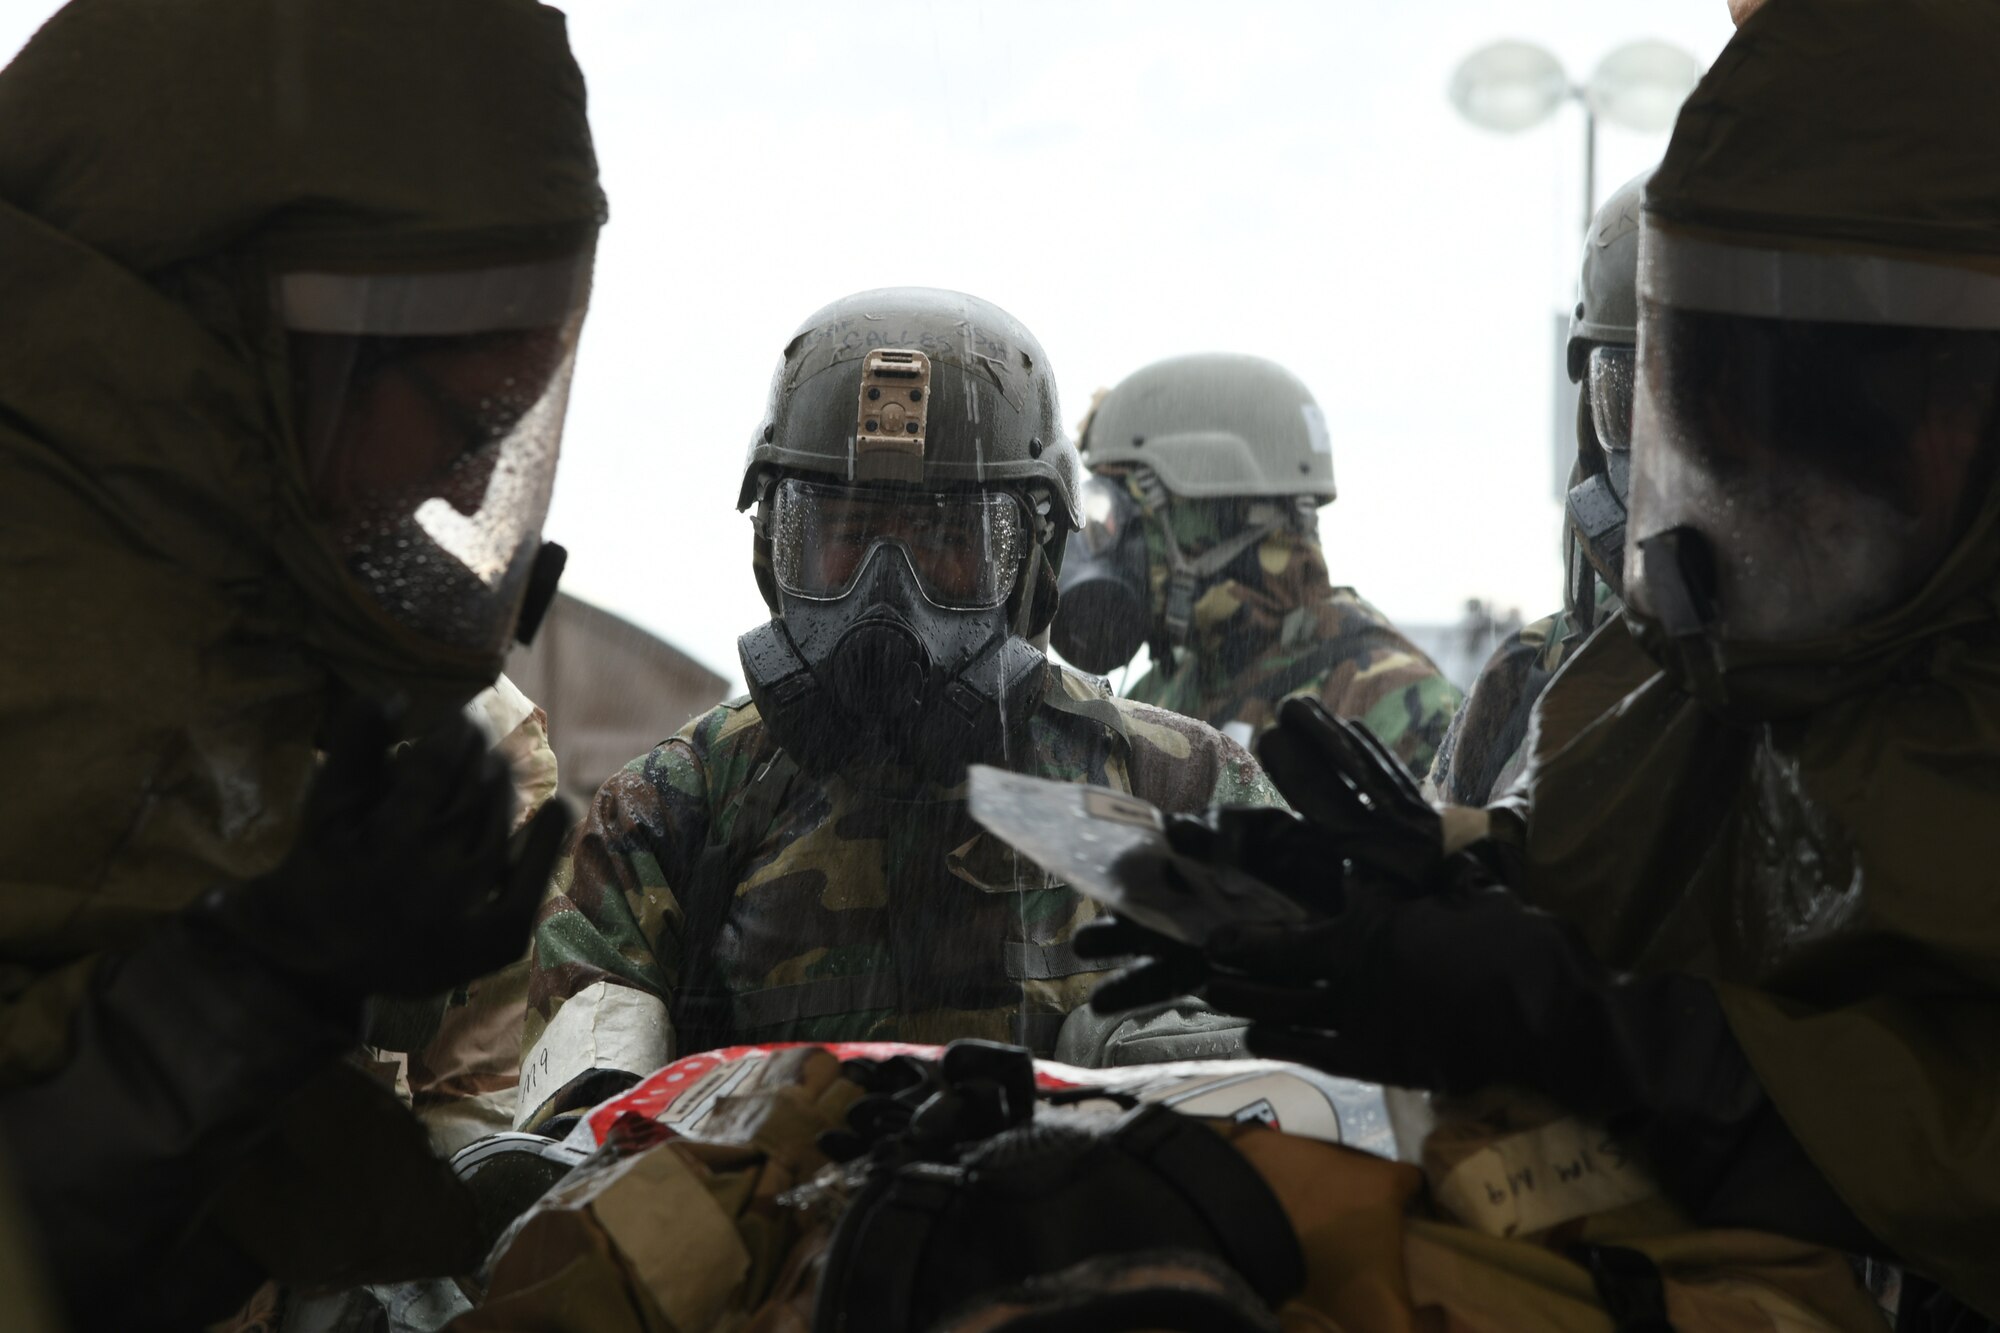 A U.S. Air Force Airman from the 355th Wing is decontaminated after a simulated chemical attack during Exercise Bushwhacker 19-08 at Libby Army Airfield, Arizona, Nov. 6, 2019. The wing is proving the Dynamic Wing deployment concept as it continues to lead the Air Force in operational readiness. (U.S. Air Force photo by Airman 1st Class Sari A. Seibert)